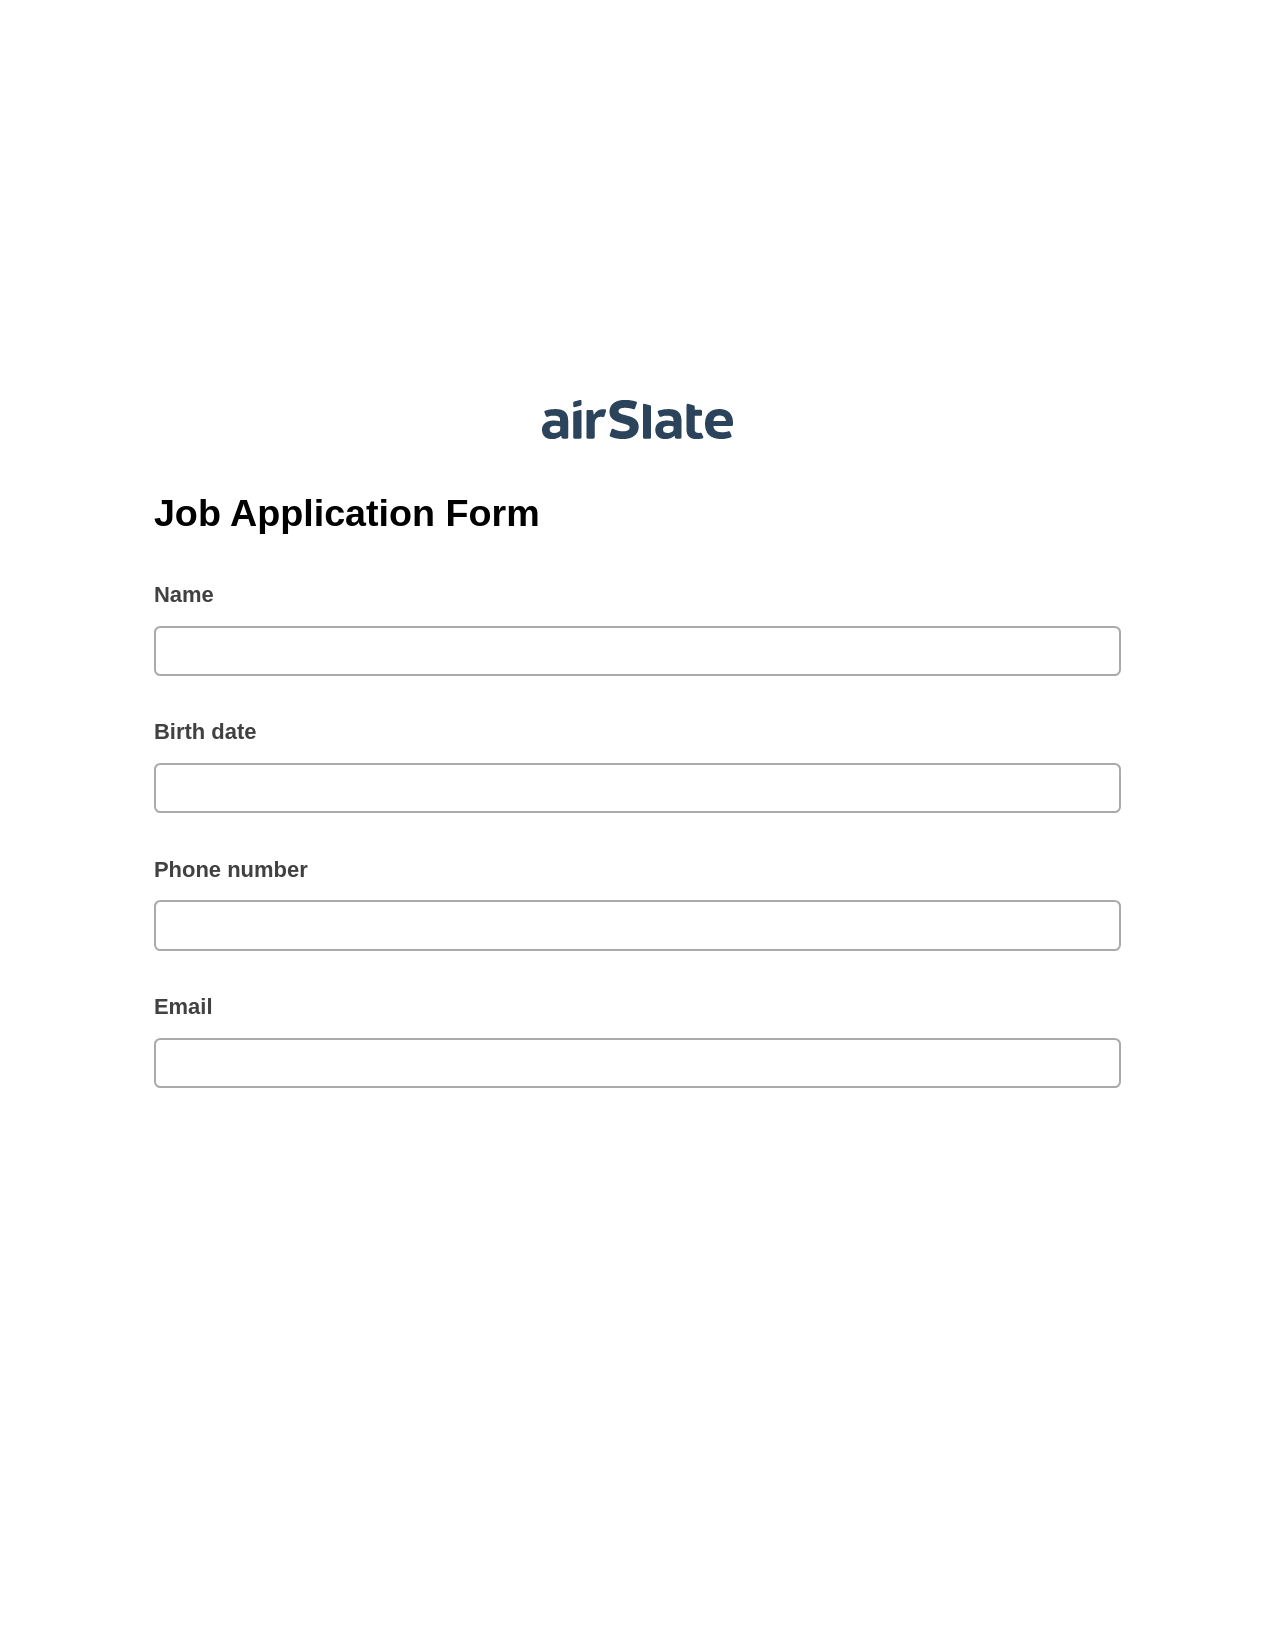 Multirole Job Application Form Pre-fill from Salesforce Record Bot, Send a Slate to Salesforce Contact Bot, Export to Excel 365 Bot